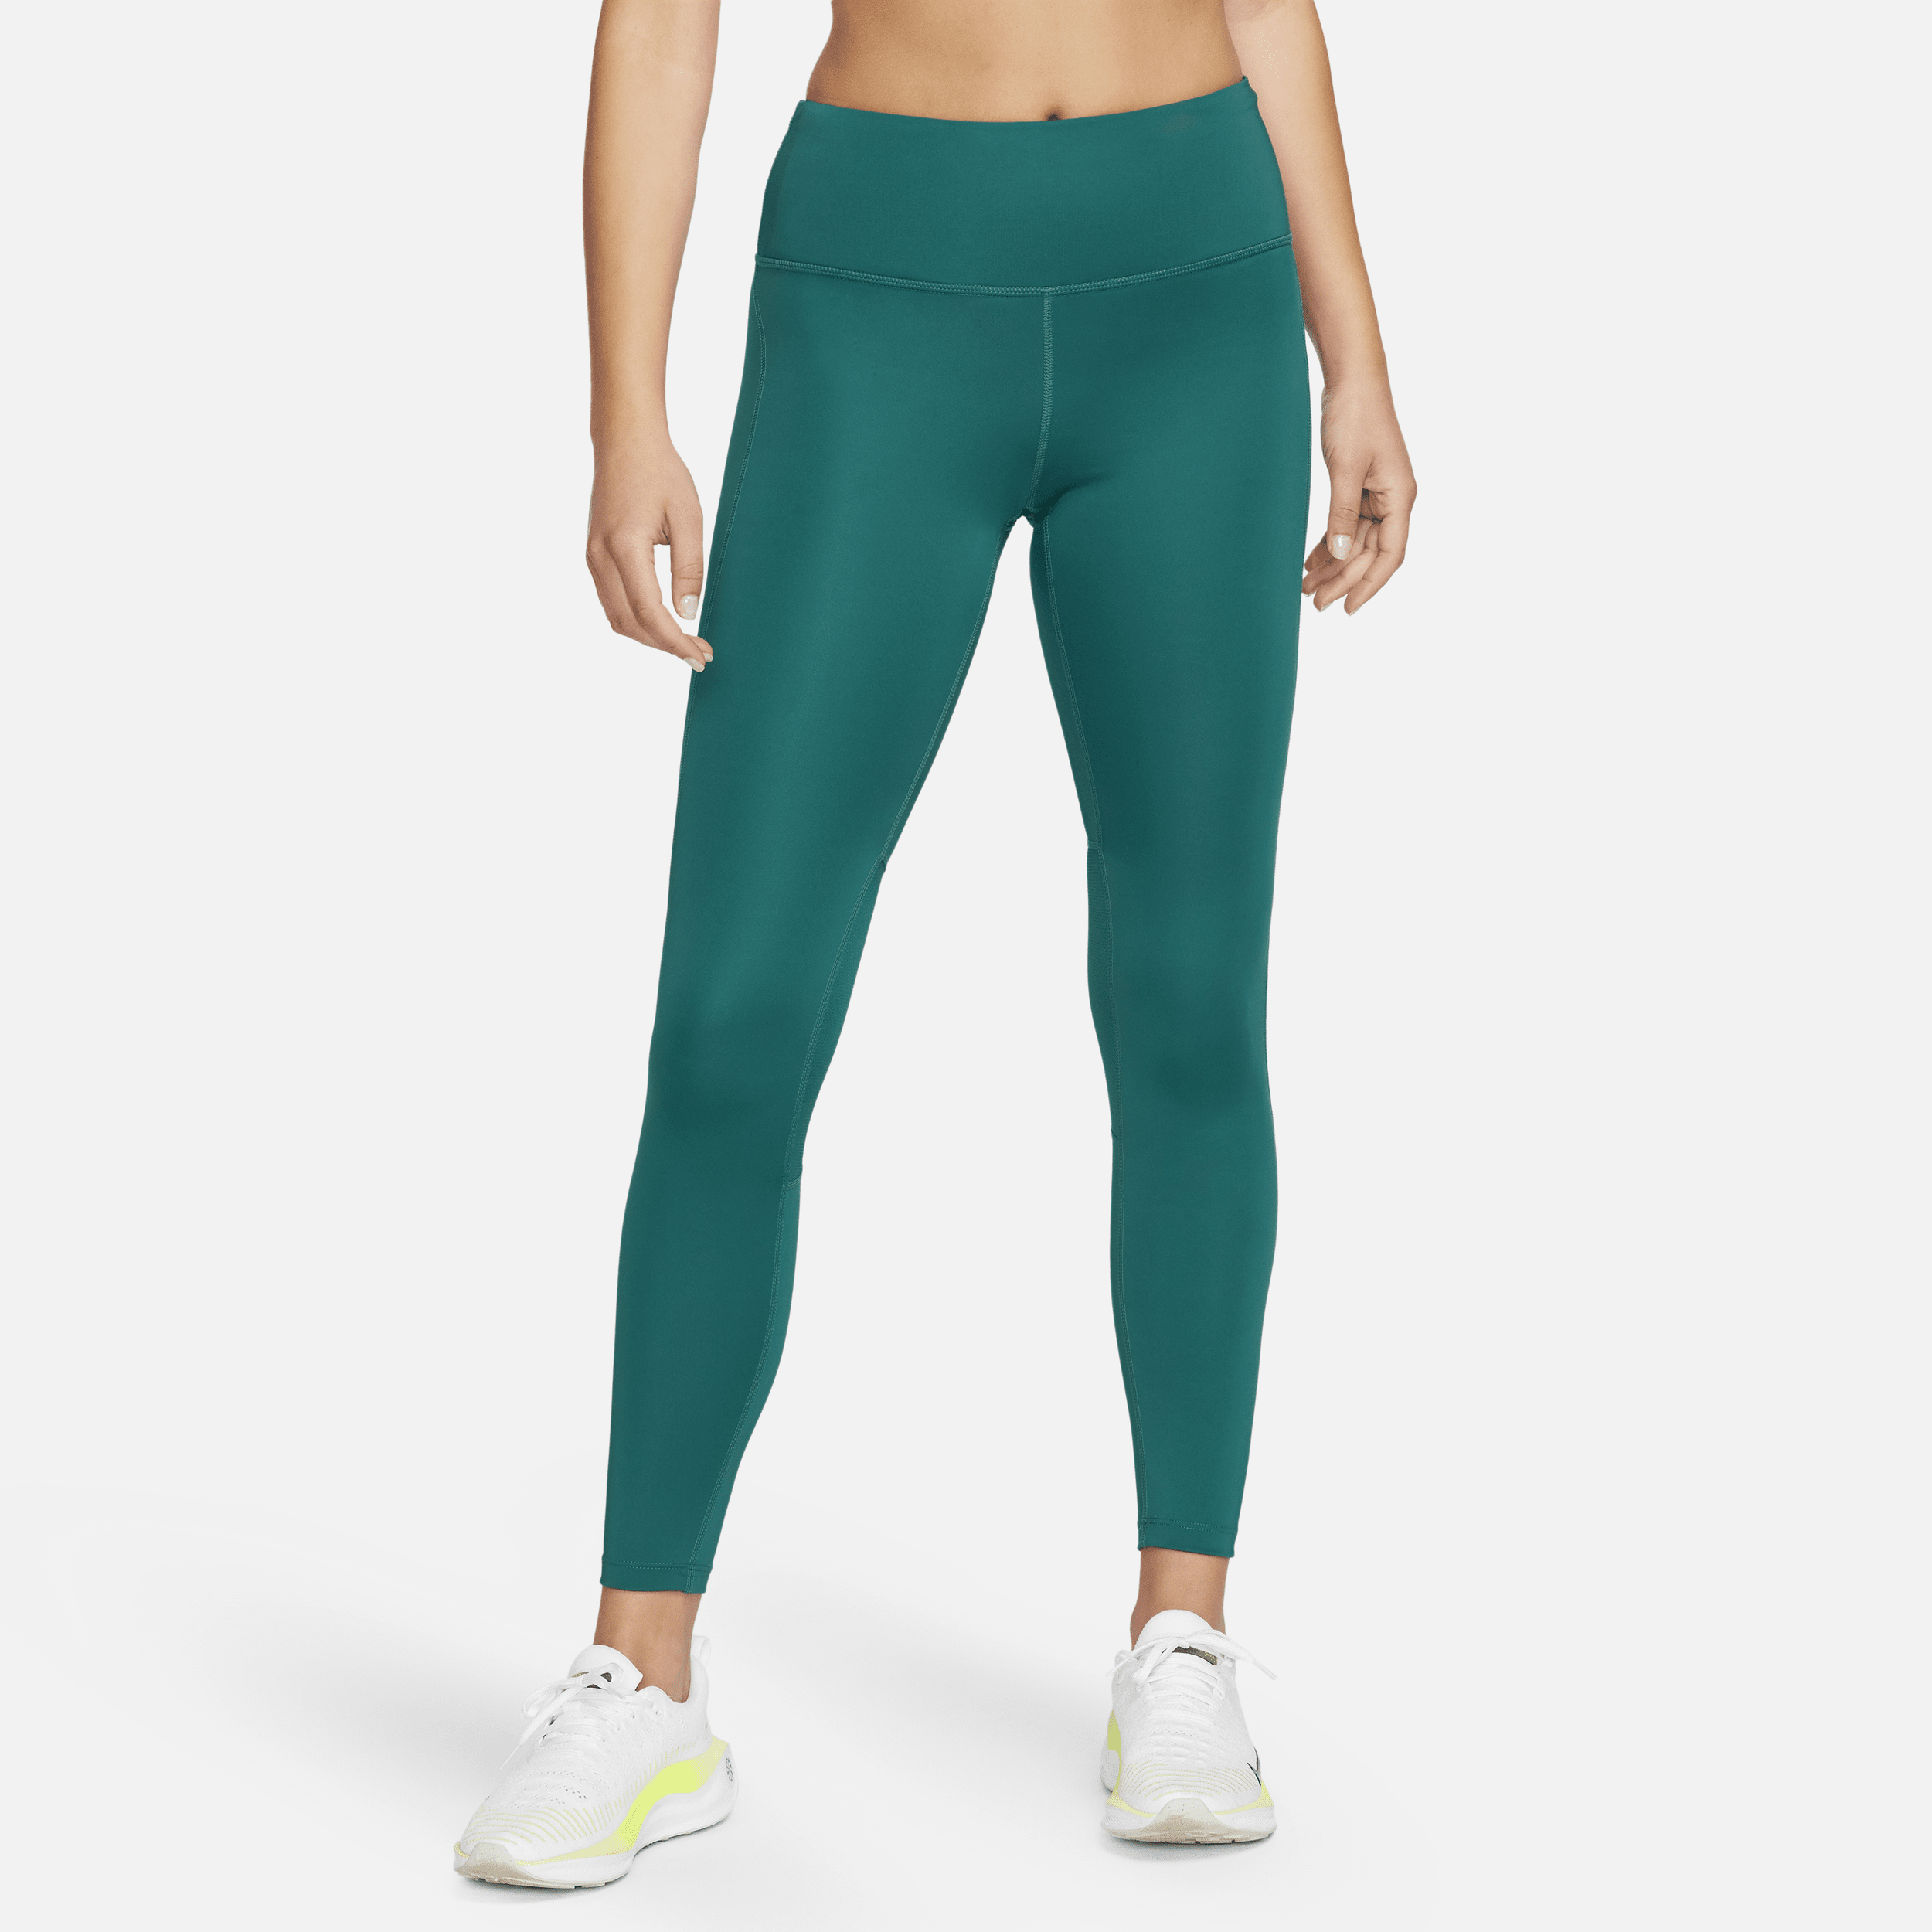 NIKE WOMEN'S FAST MID-RISE 7/8 GRAPHIC LEGGINGS WITH POCKETS,1012446996